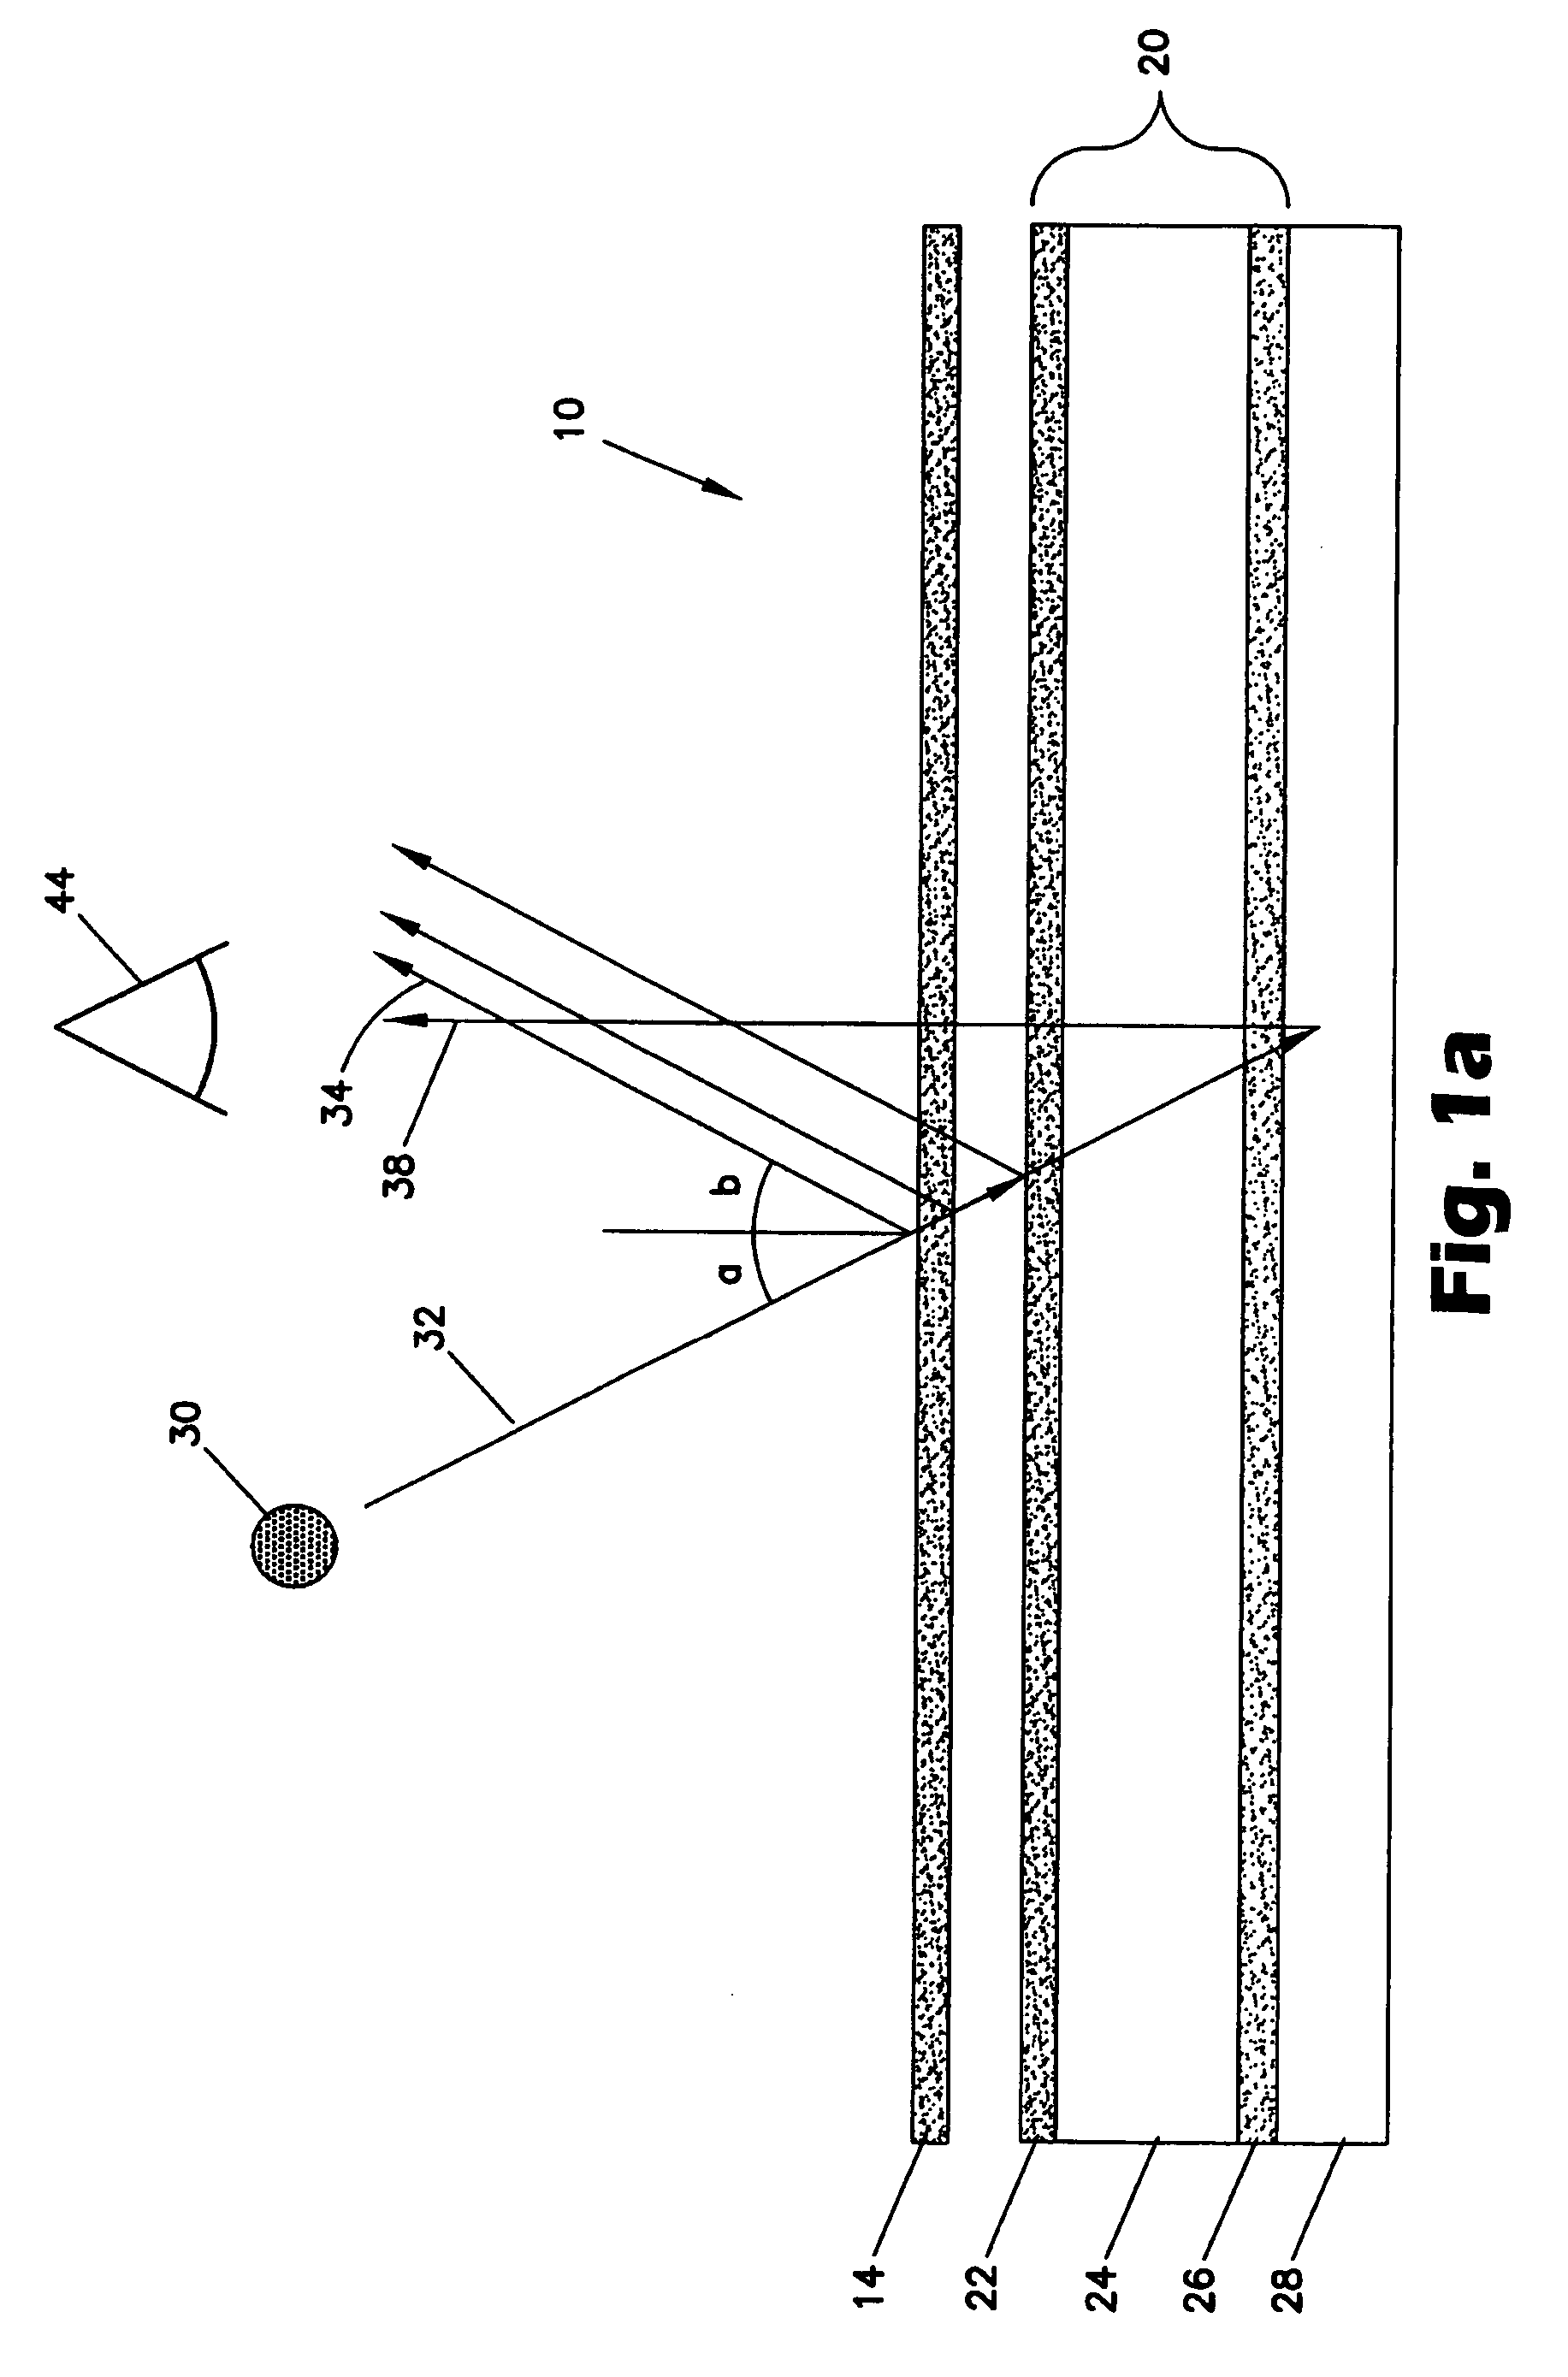 Optical film having microeplicated structures; and methods